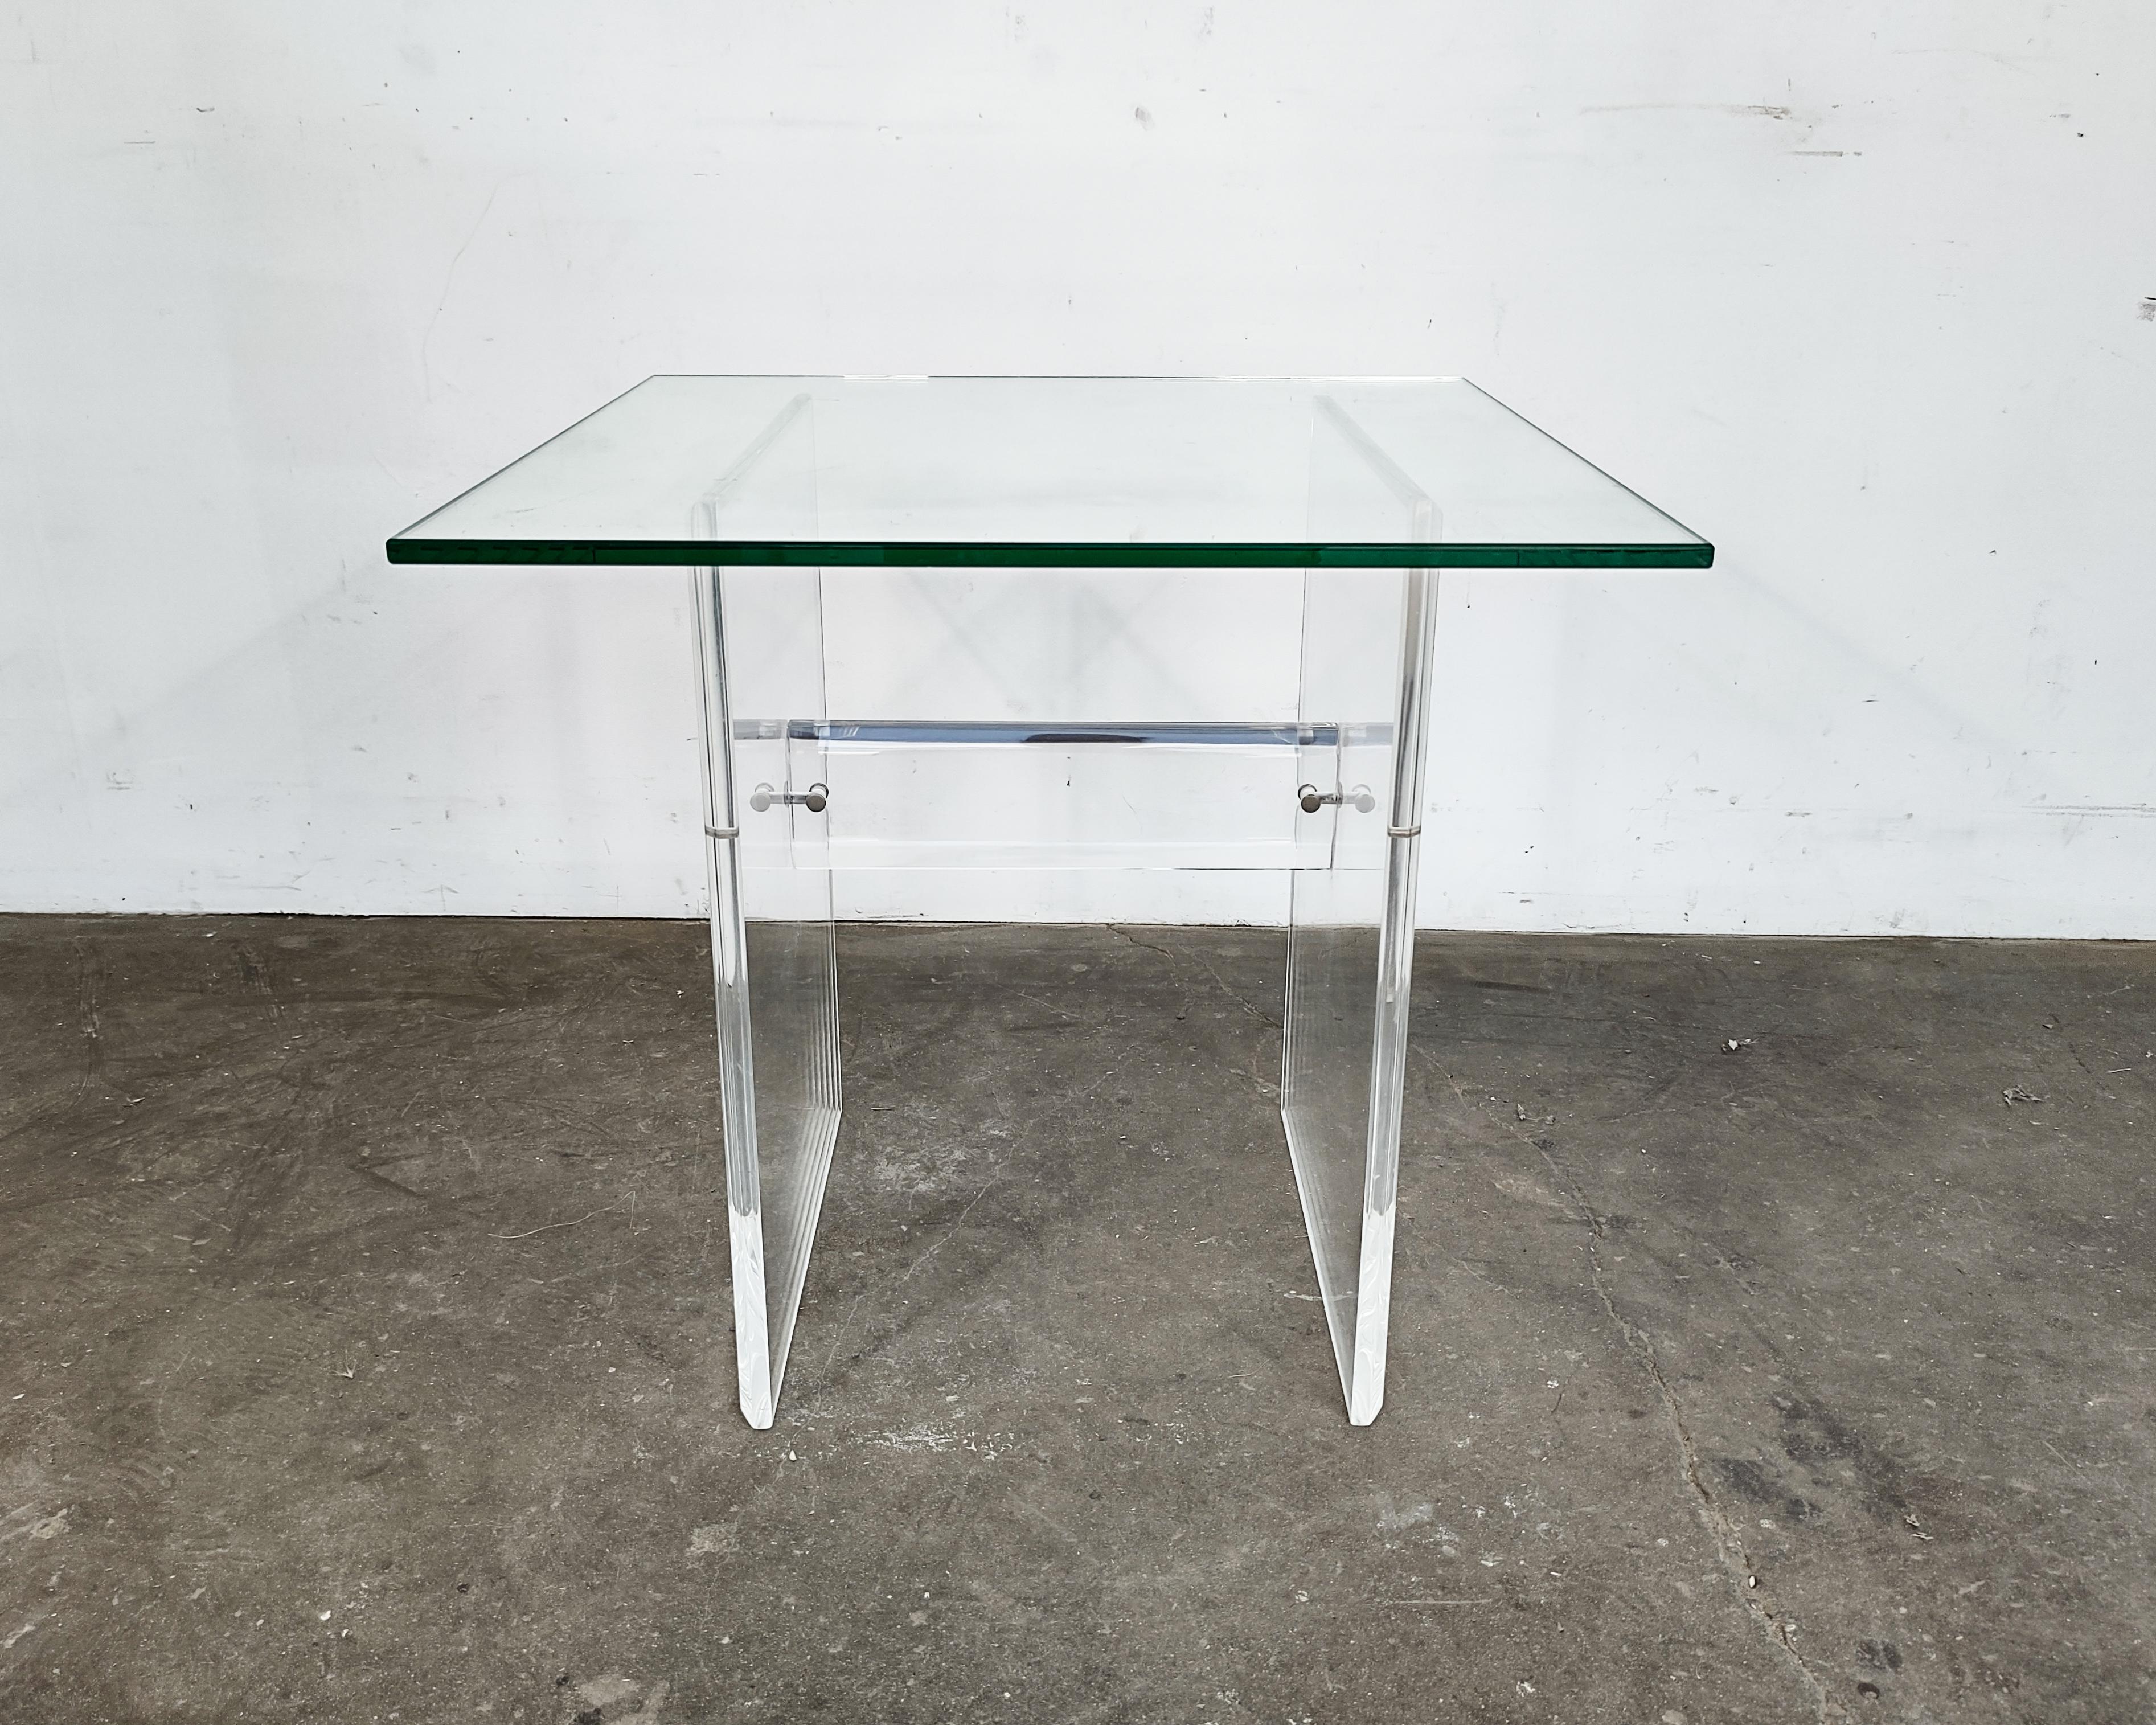 Thick lucite acrylic base with beveled edges and square glass sits on top circa 1970s-80s. Overall great condition, some light scratches on glass. The base is held together by hardware and pieces can pivot when it's by itself, once the glass top is